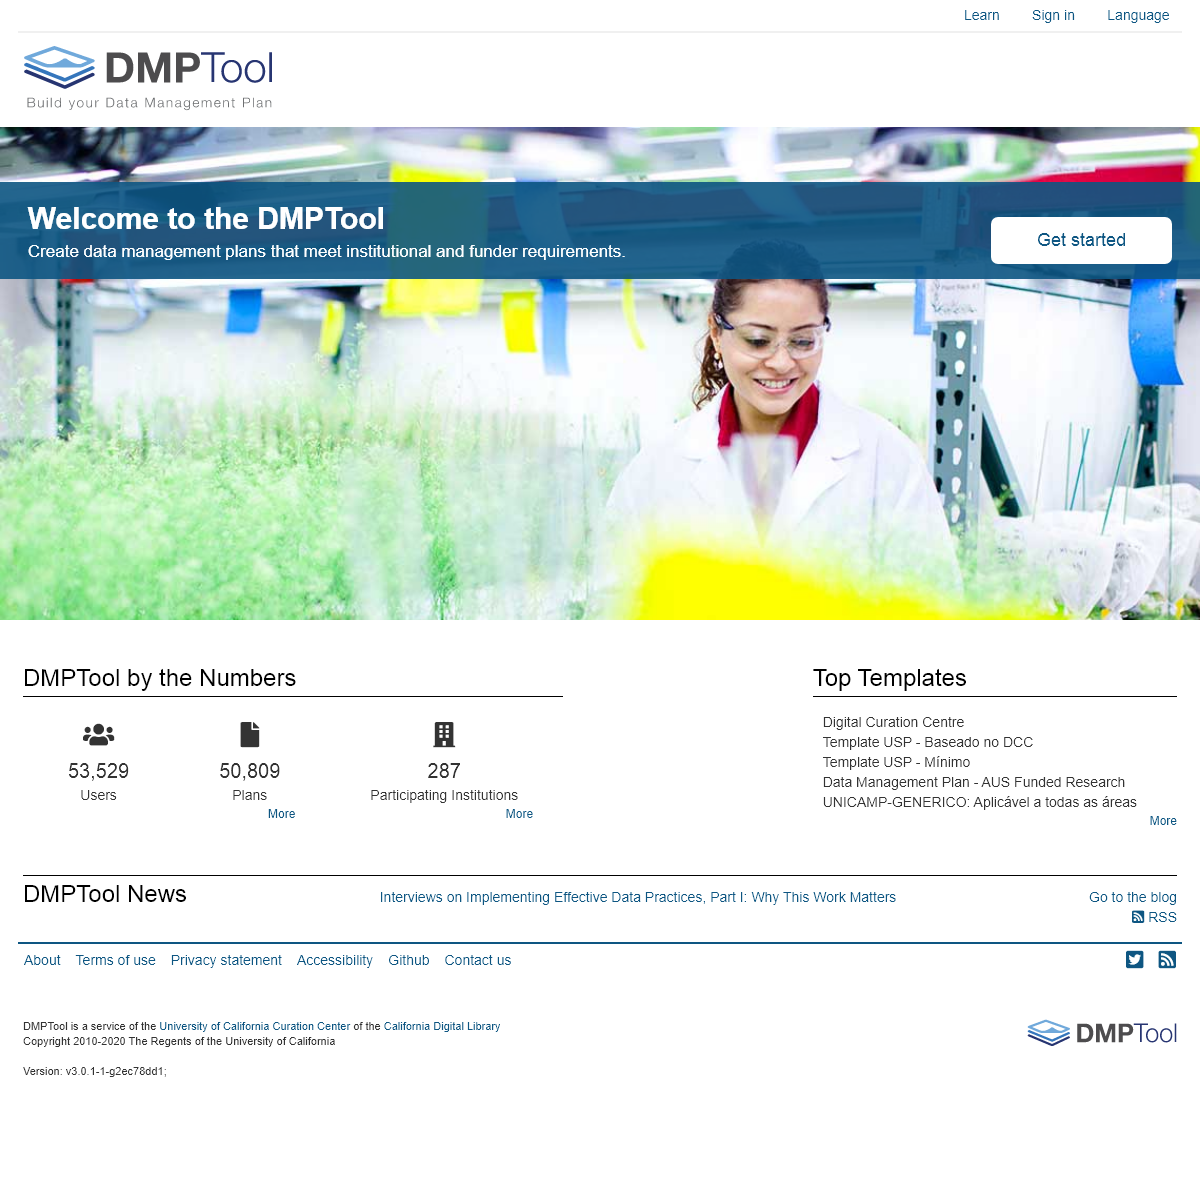 A complete backup of dmptool.org